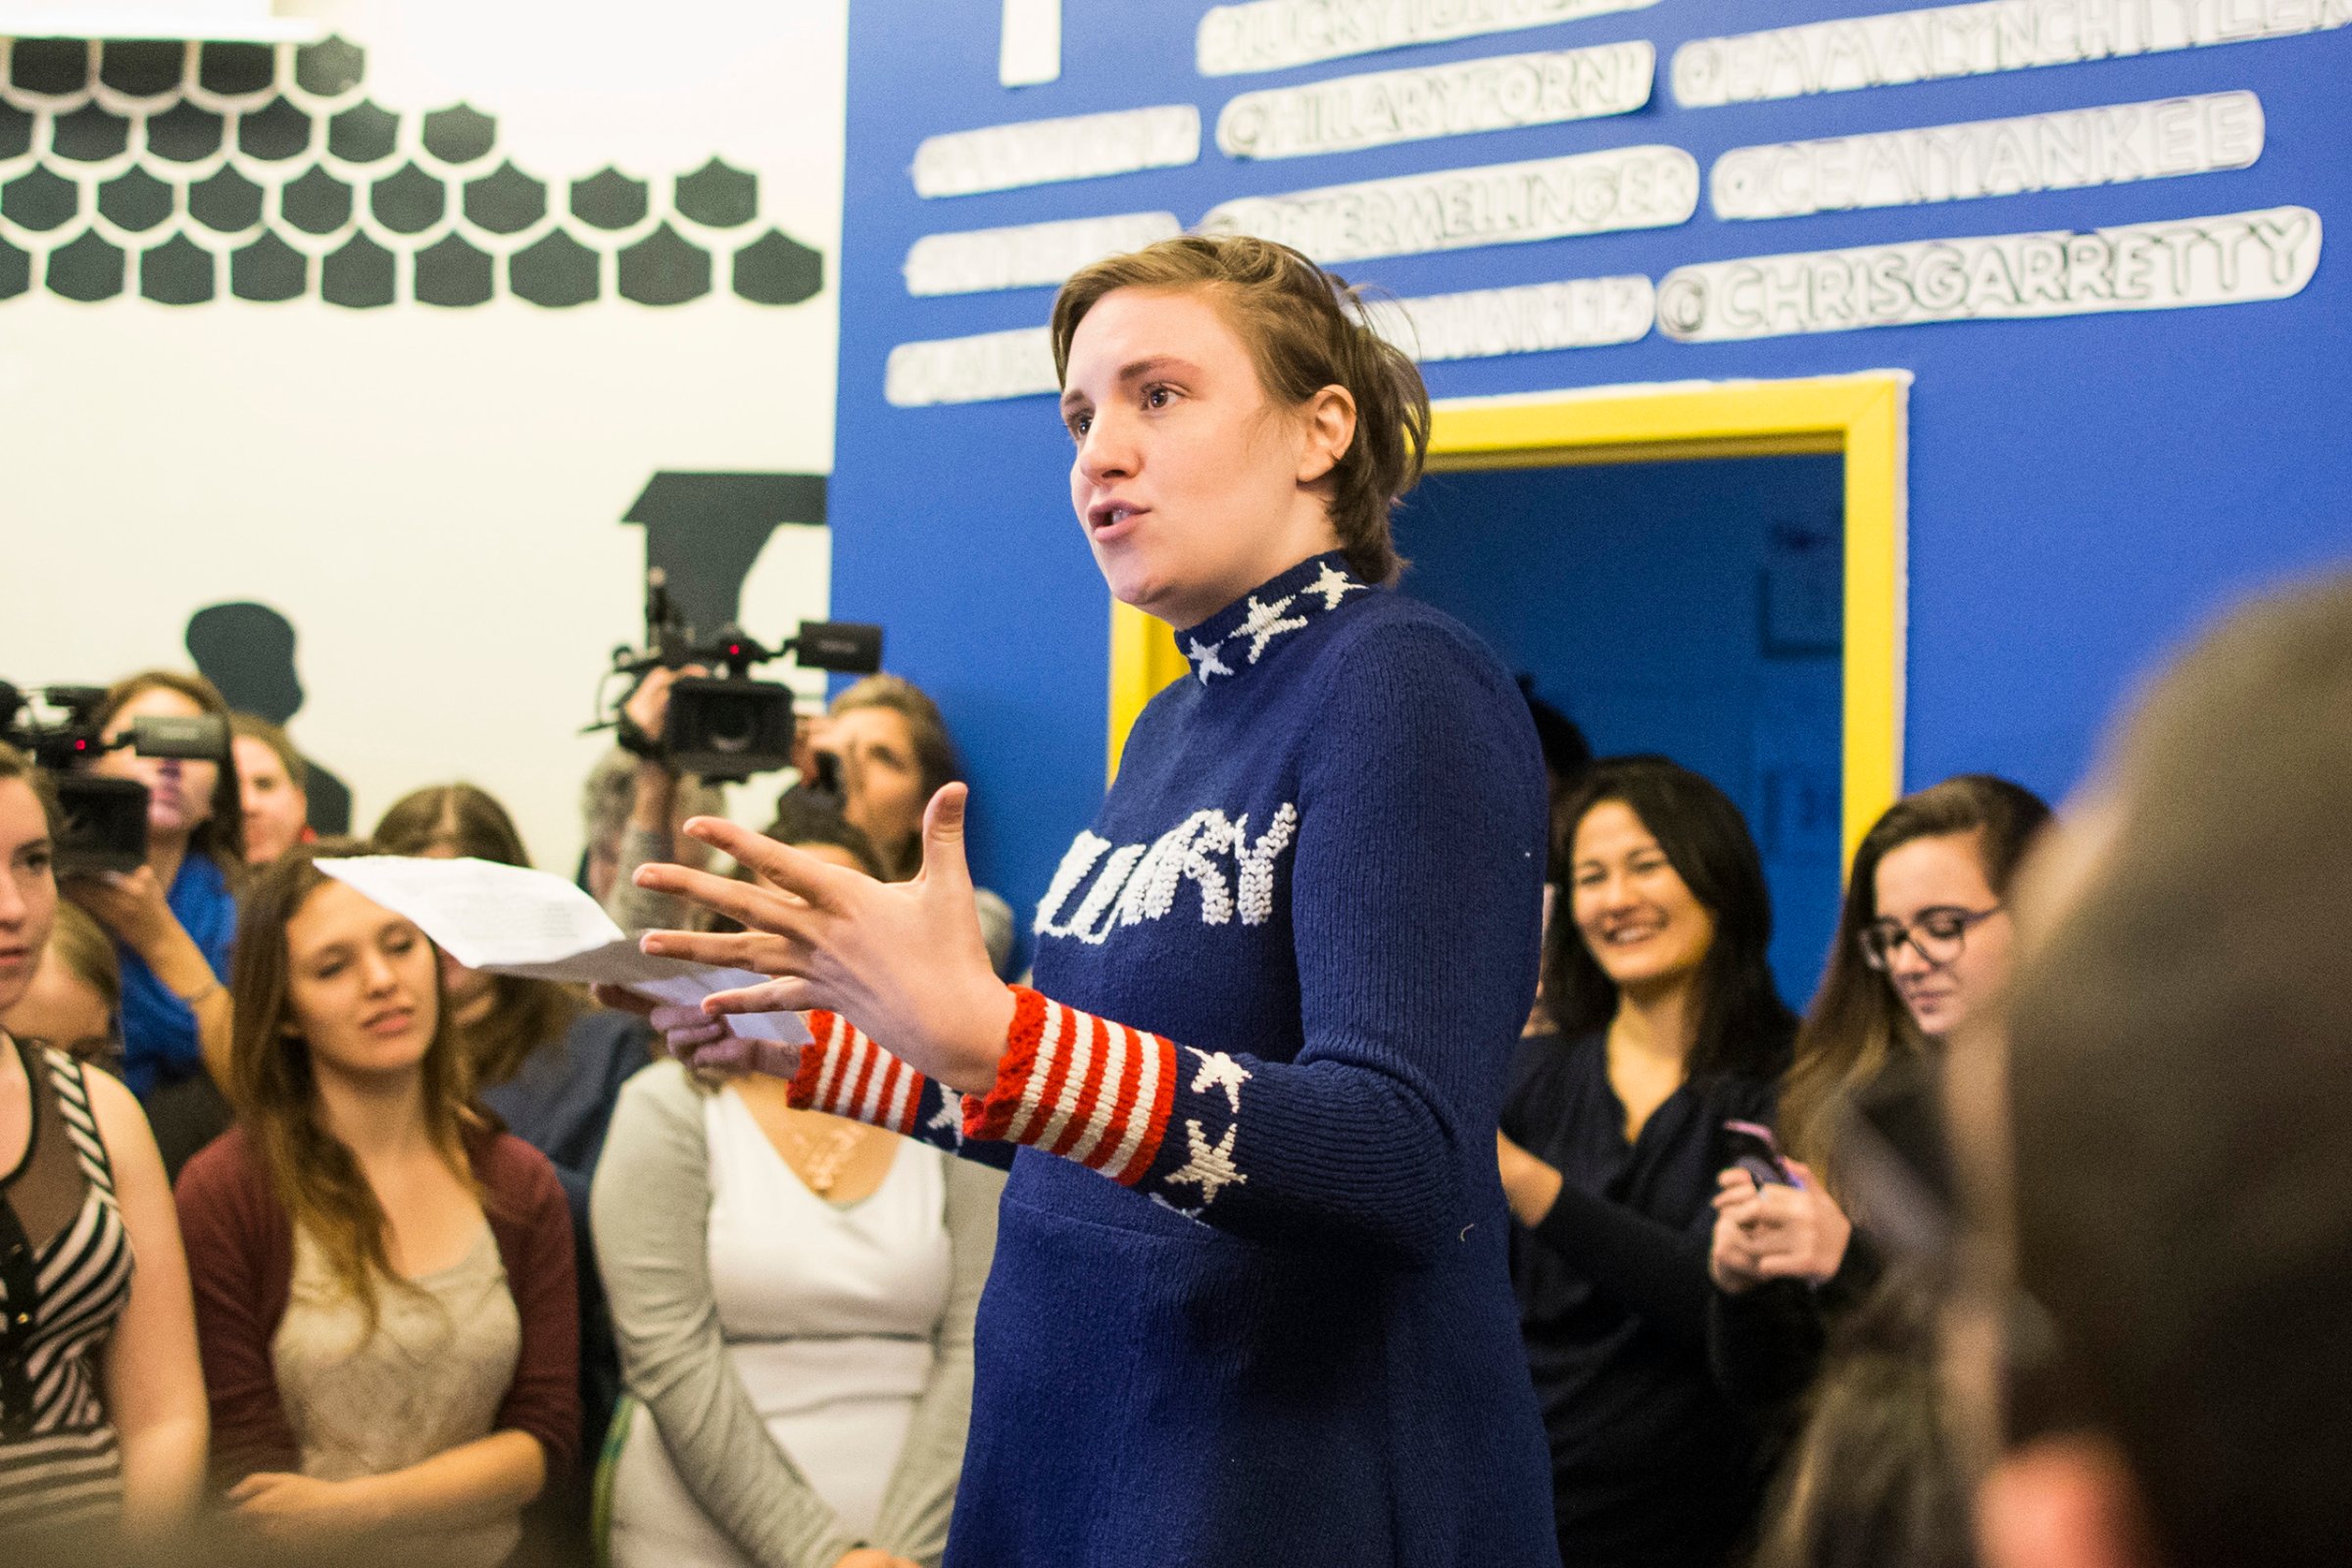 Lena Dunham speaks to a crowd at a Hillary Clinton campaign office in Manchester, New Hampshire on Jan. 8, 2016.